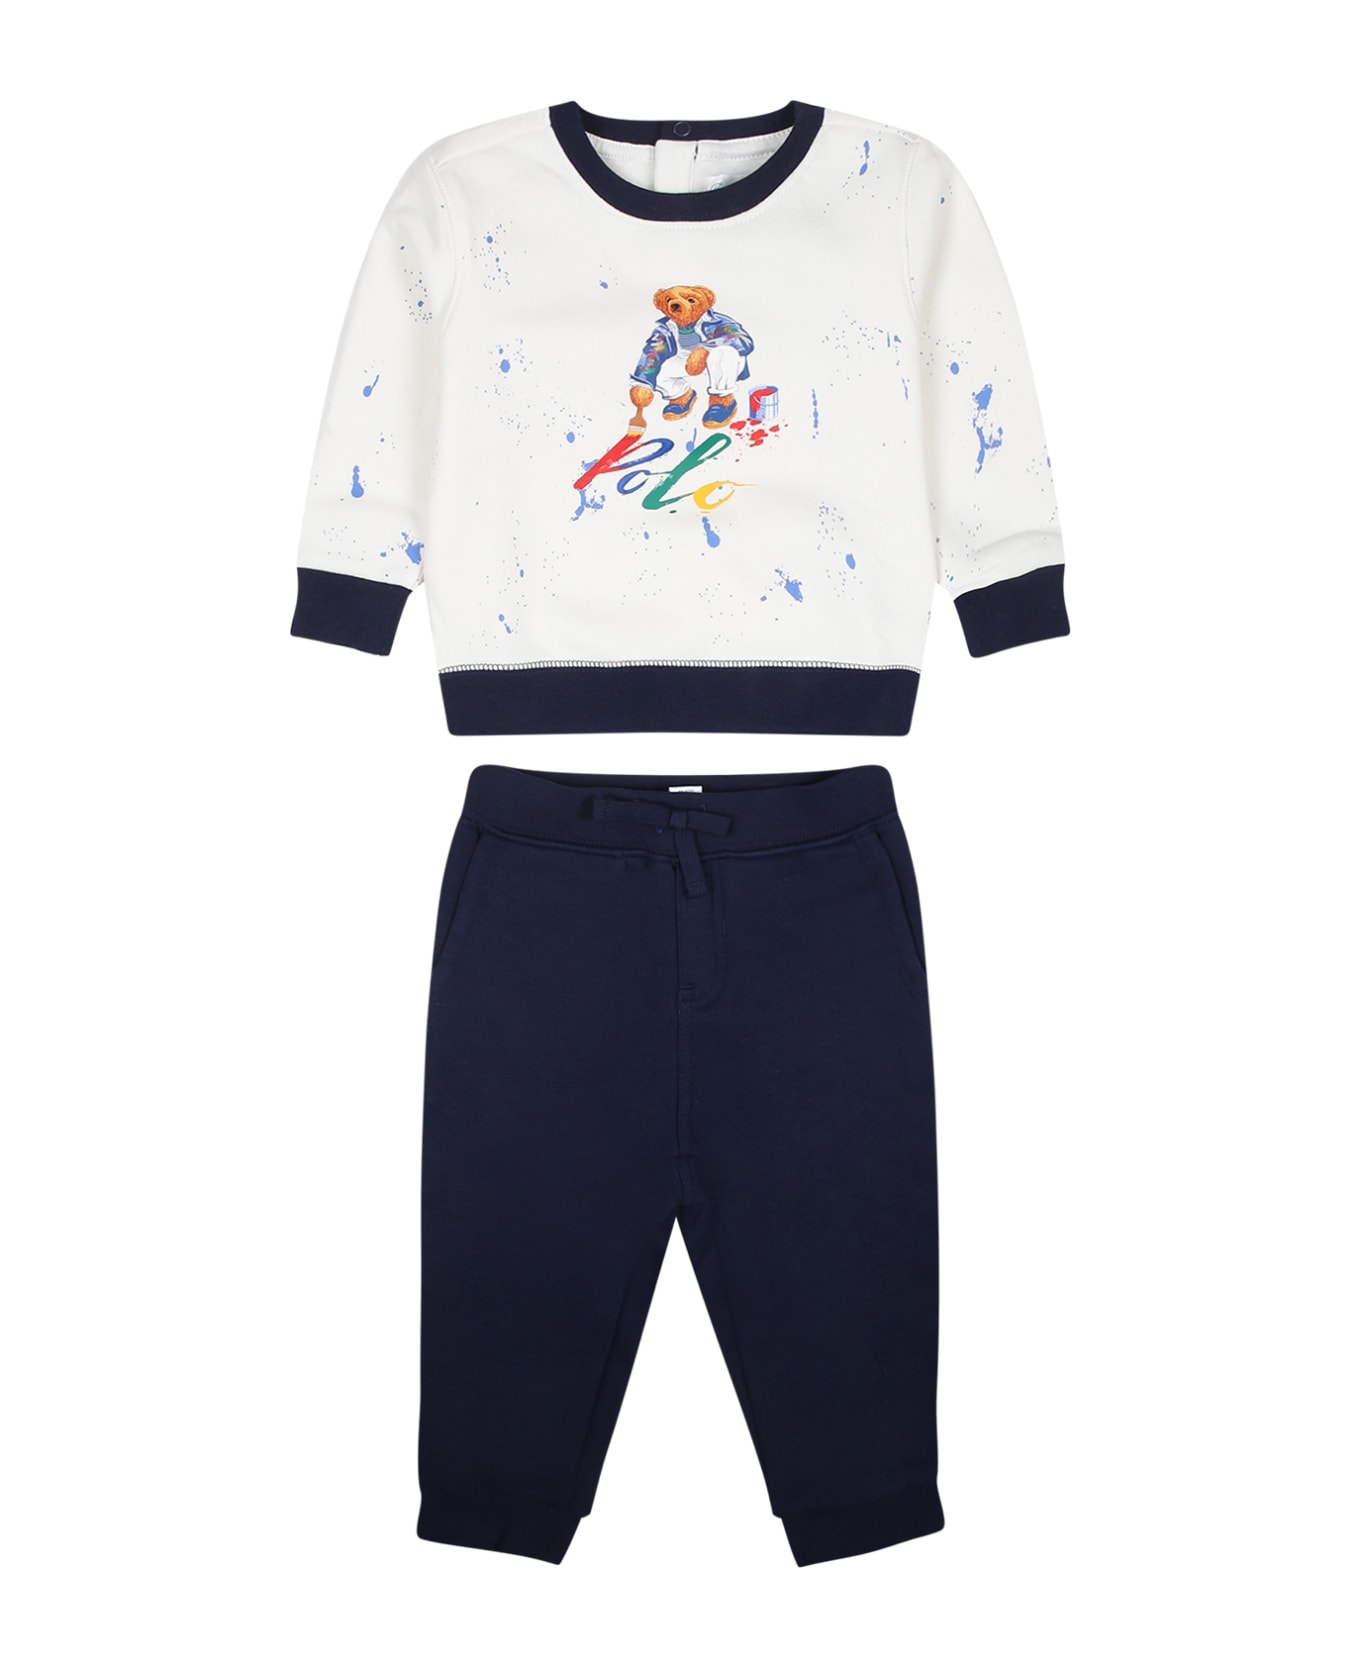 Ralph Lauren Blue Suit For Baby Boy With Polo Bear - Multicolor